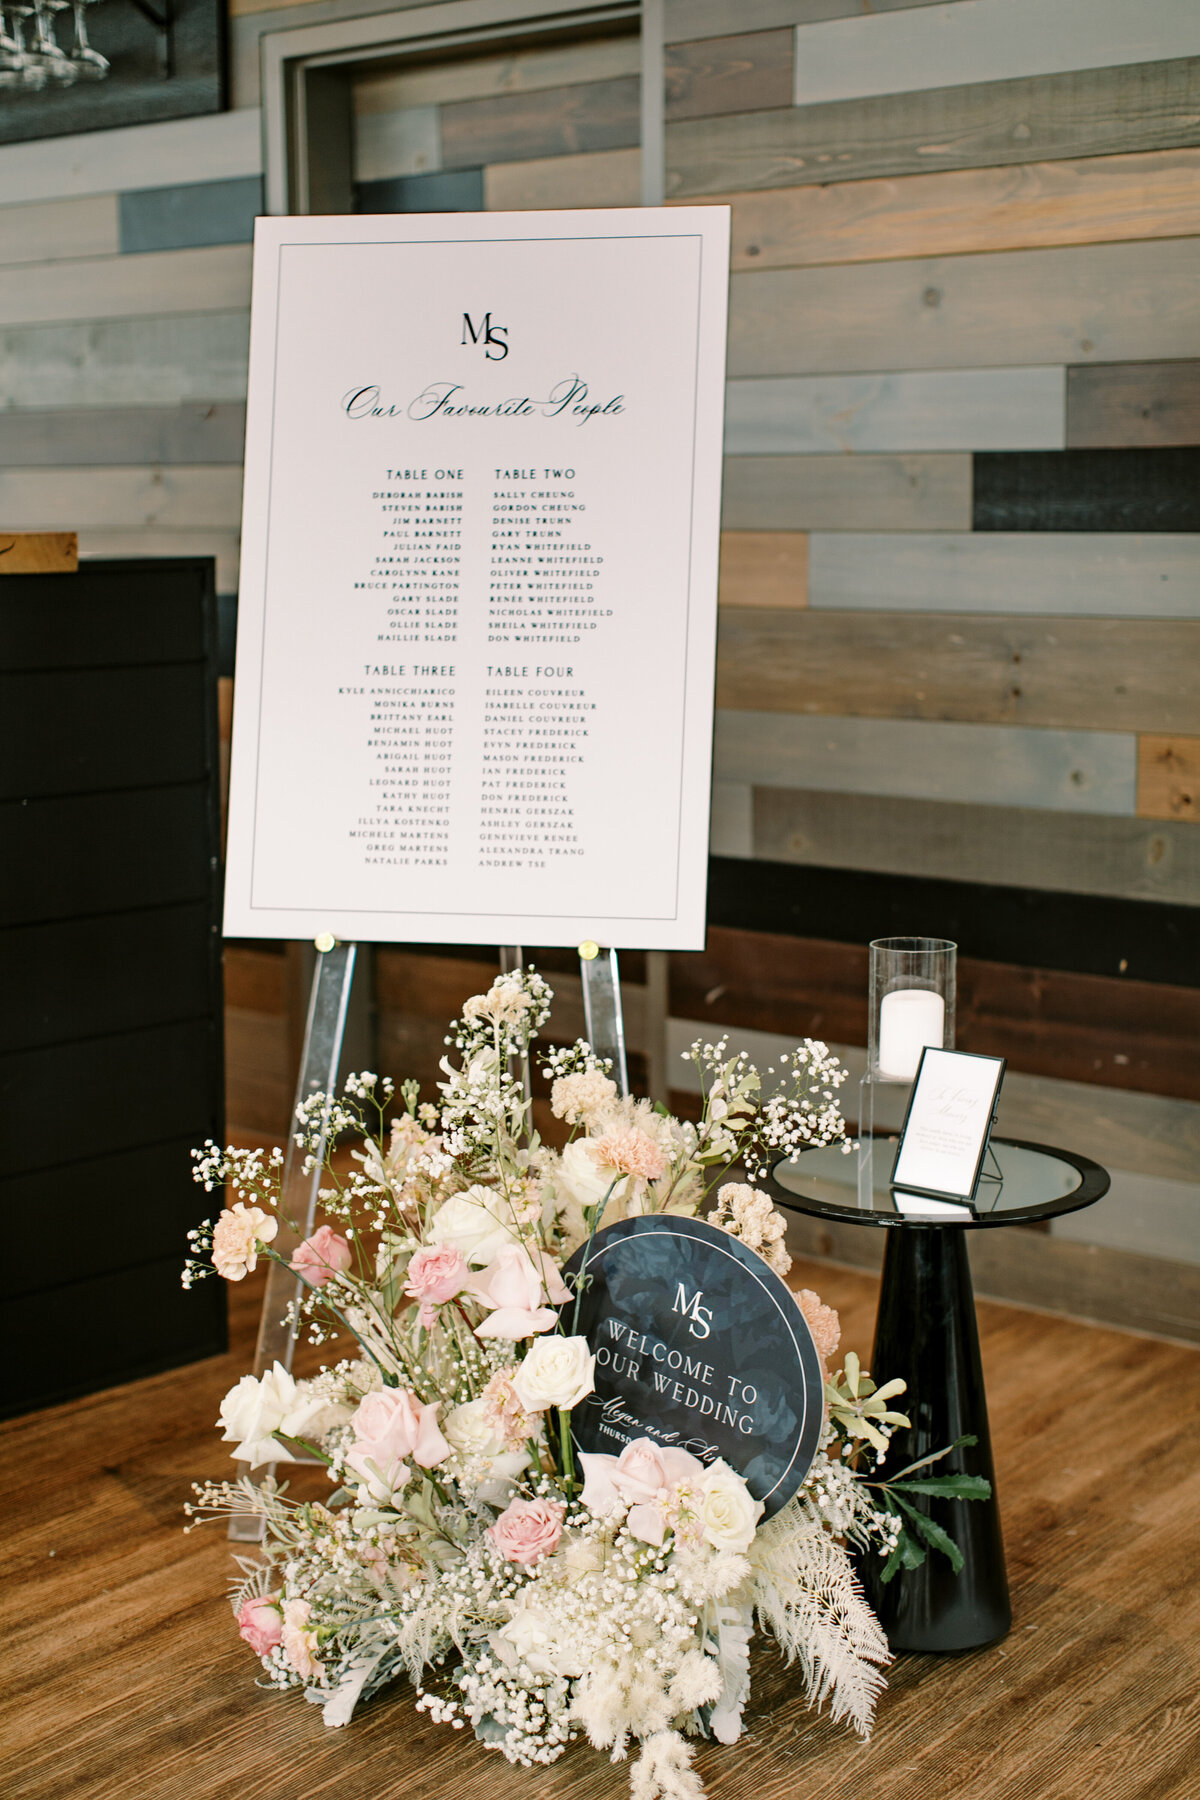 Modern wedding signage, black and white seating chart inspiration, real Canmore wedding designed by Rebekah Bronte, at The Sensory Canmore - modern wedding designer for Calgary, Canmore, Banff, Edmonton, & beyond